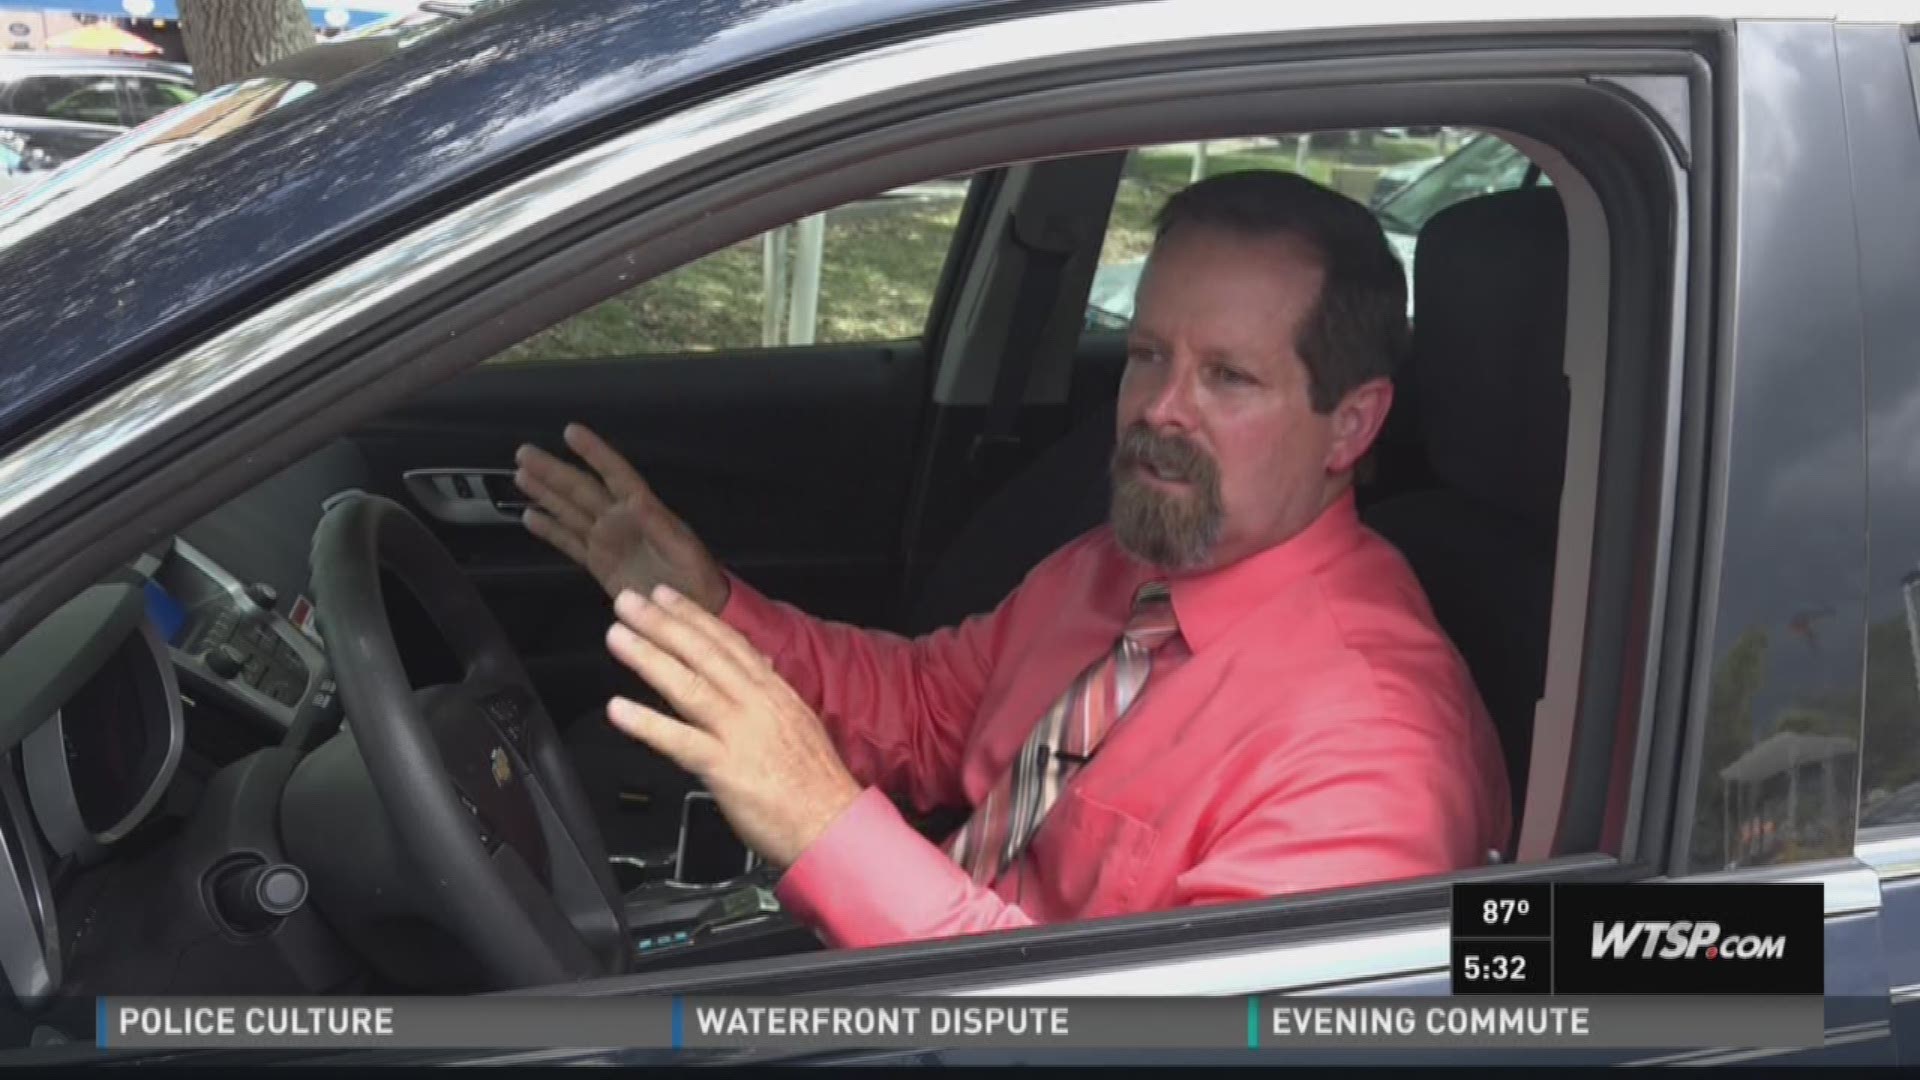 St. Pete police spokesman shows you how to act when pulled over by police.